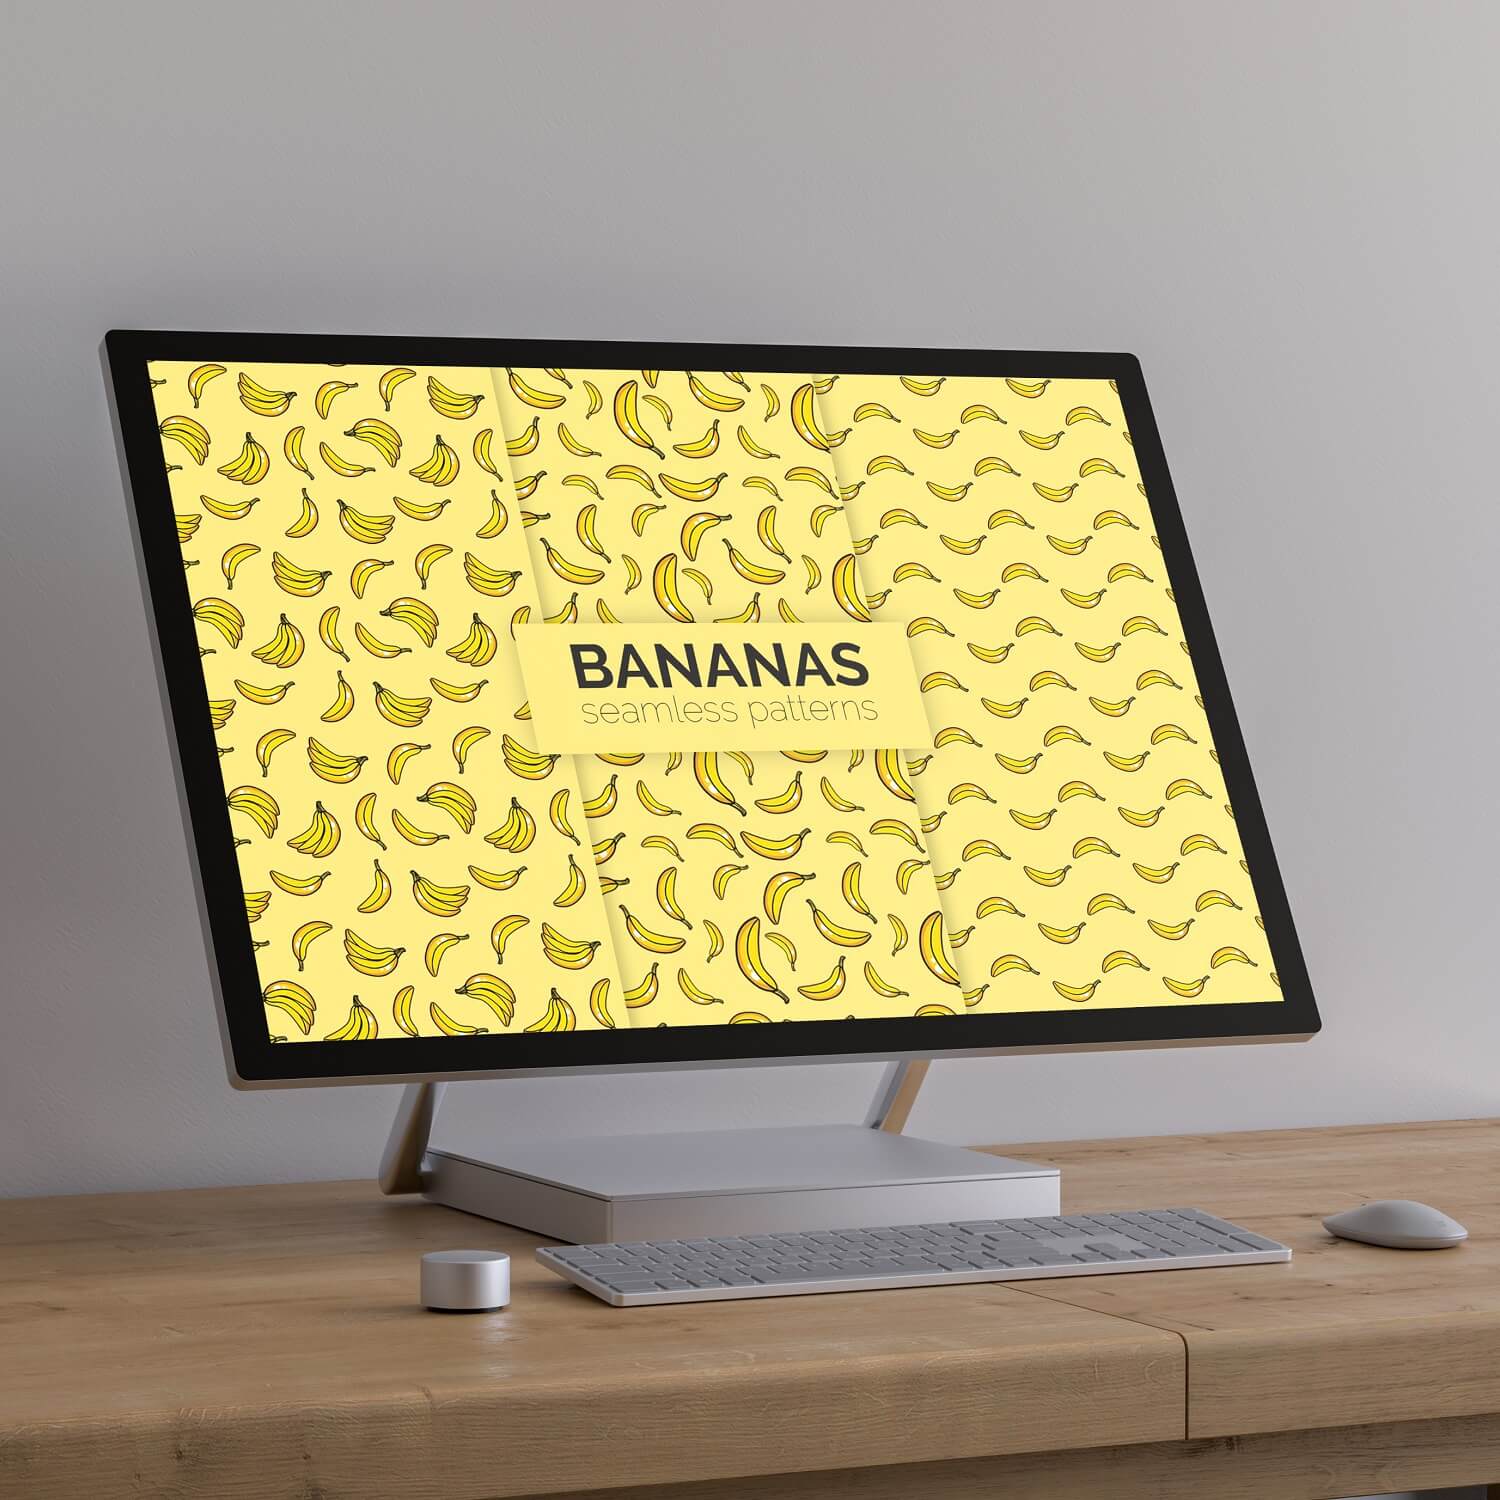 Preview Bananas Seamless Patterns on the computer.